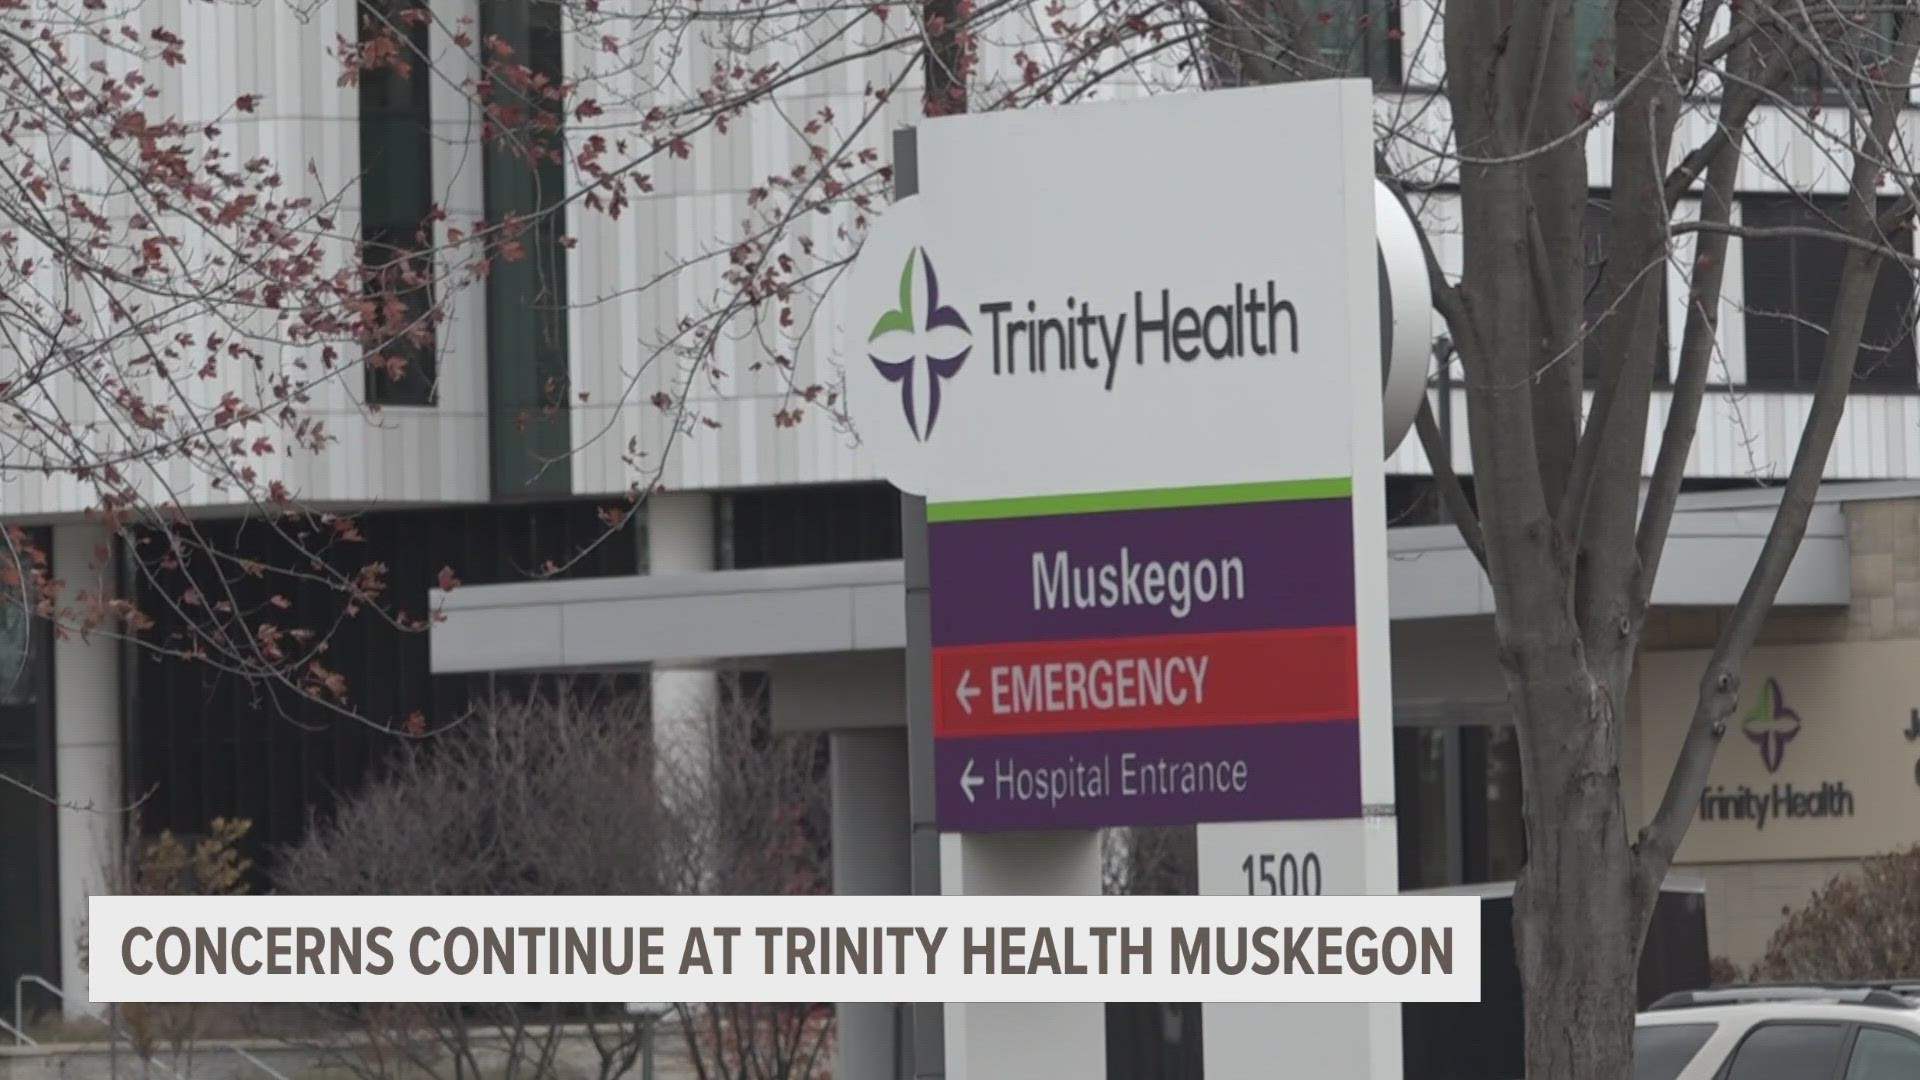 A Muskegon resident is upset by hospital wait times after he brought his 73-year-old mother to Trinity Health in Muskegon because she experienced a heart attack.